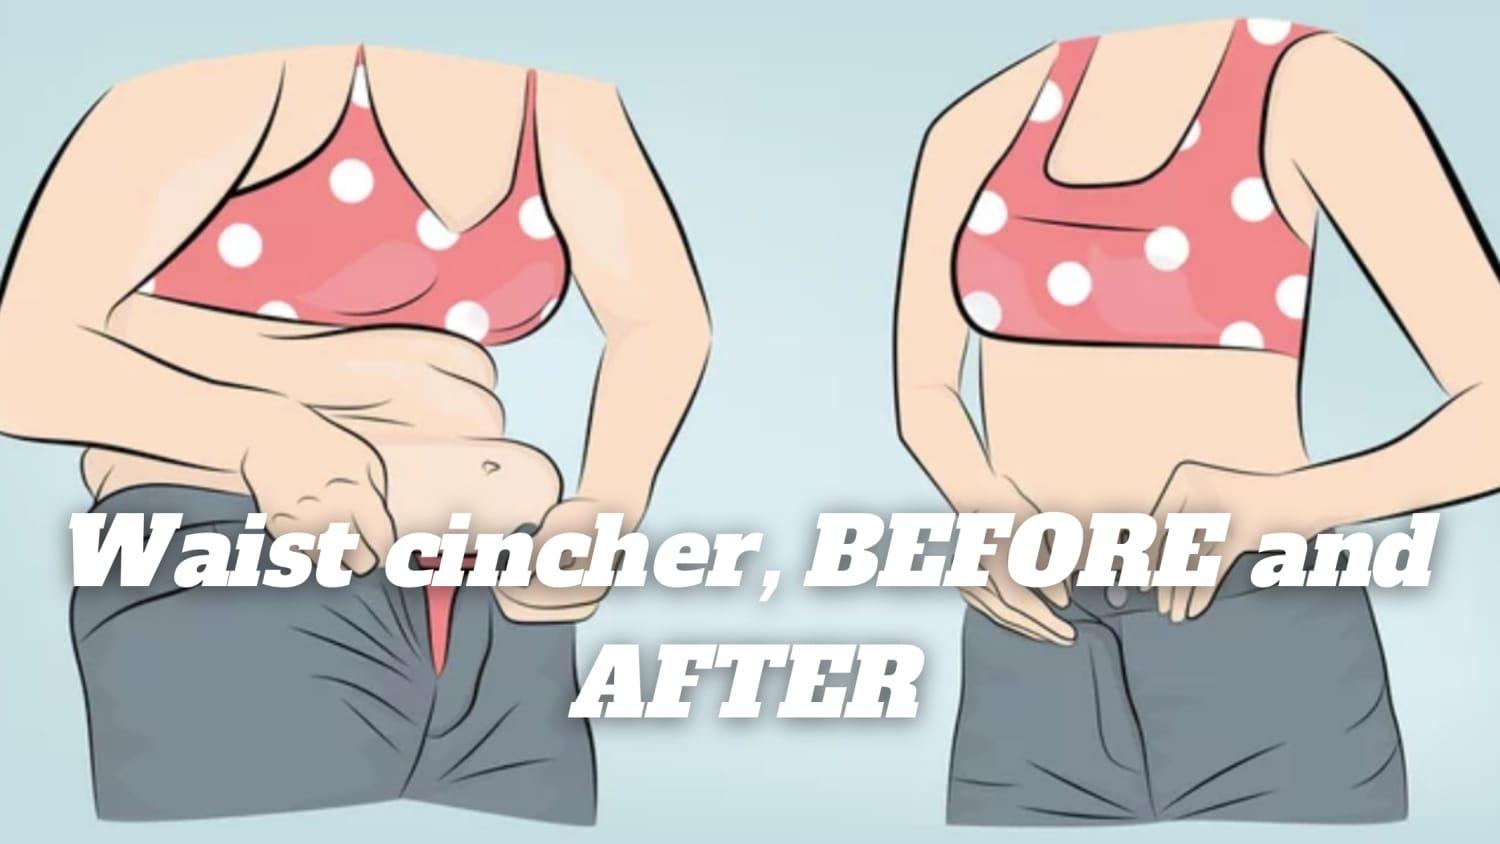 Waist cincher, BEFORE and AFTER